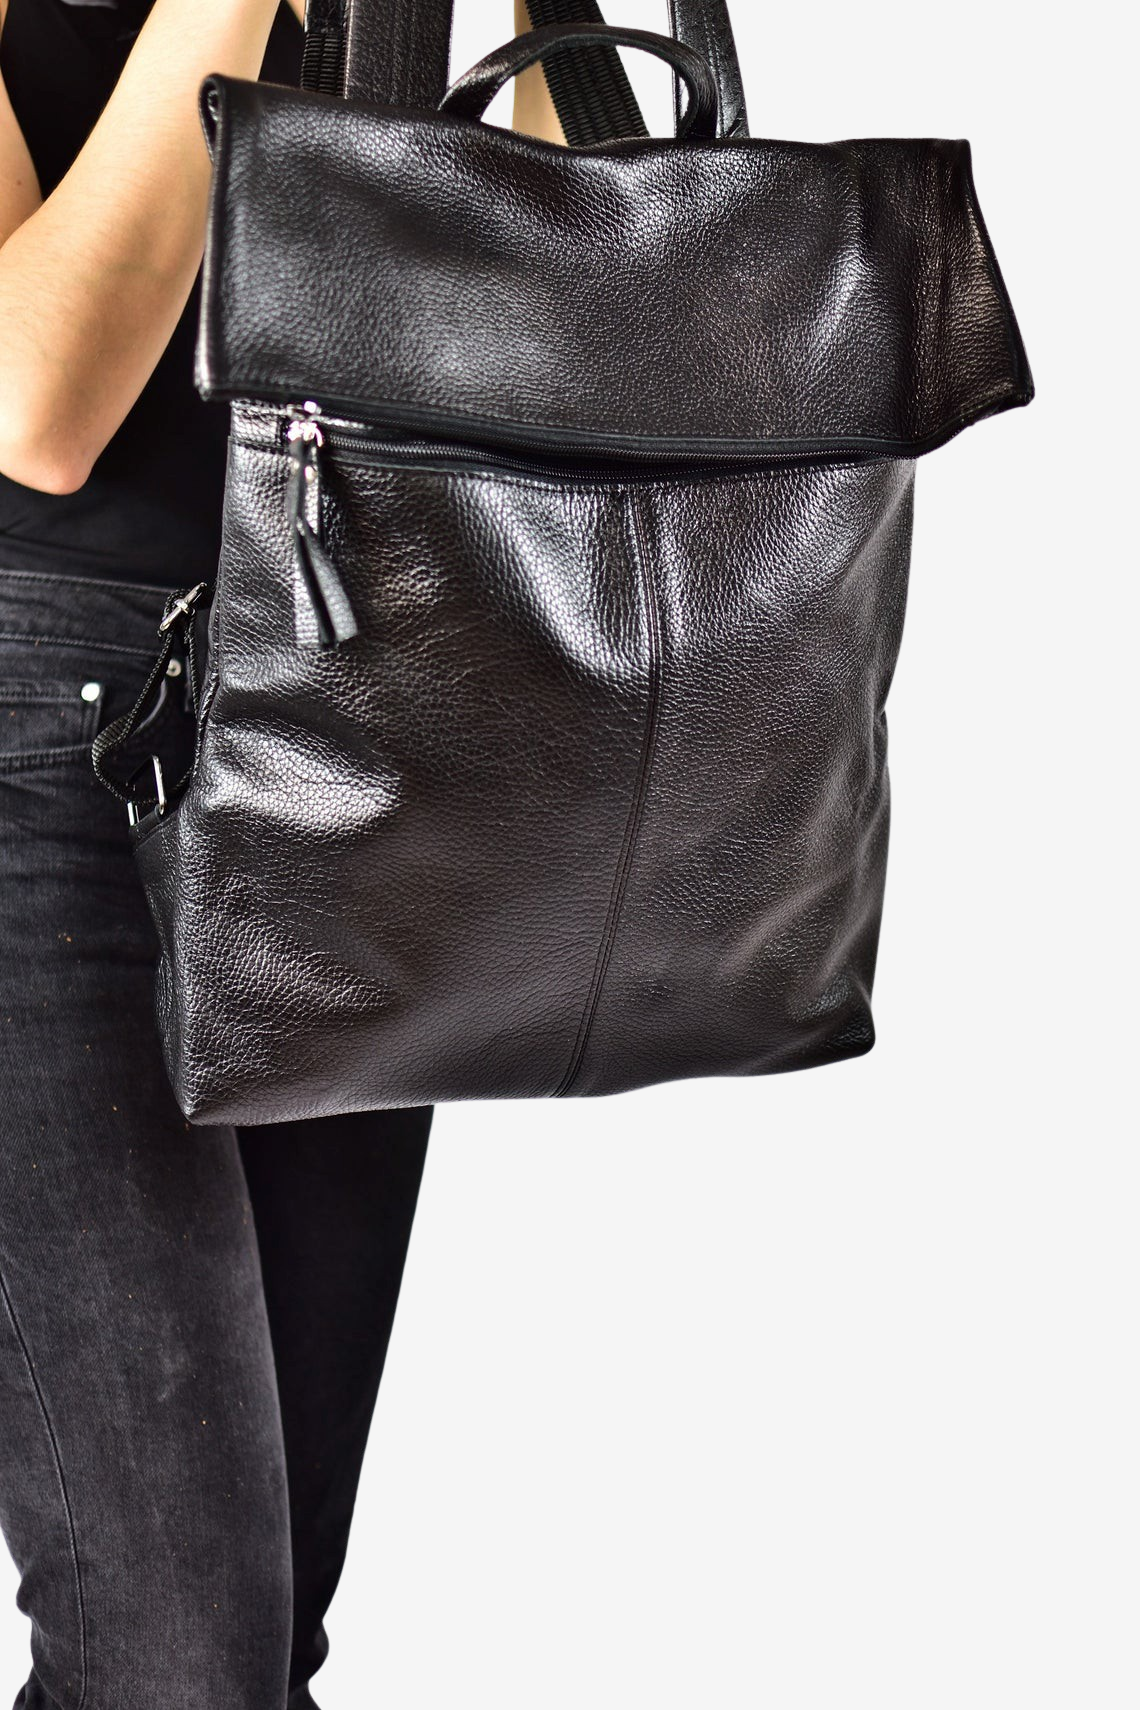  leather backpacks for women